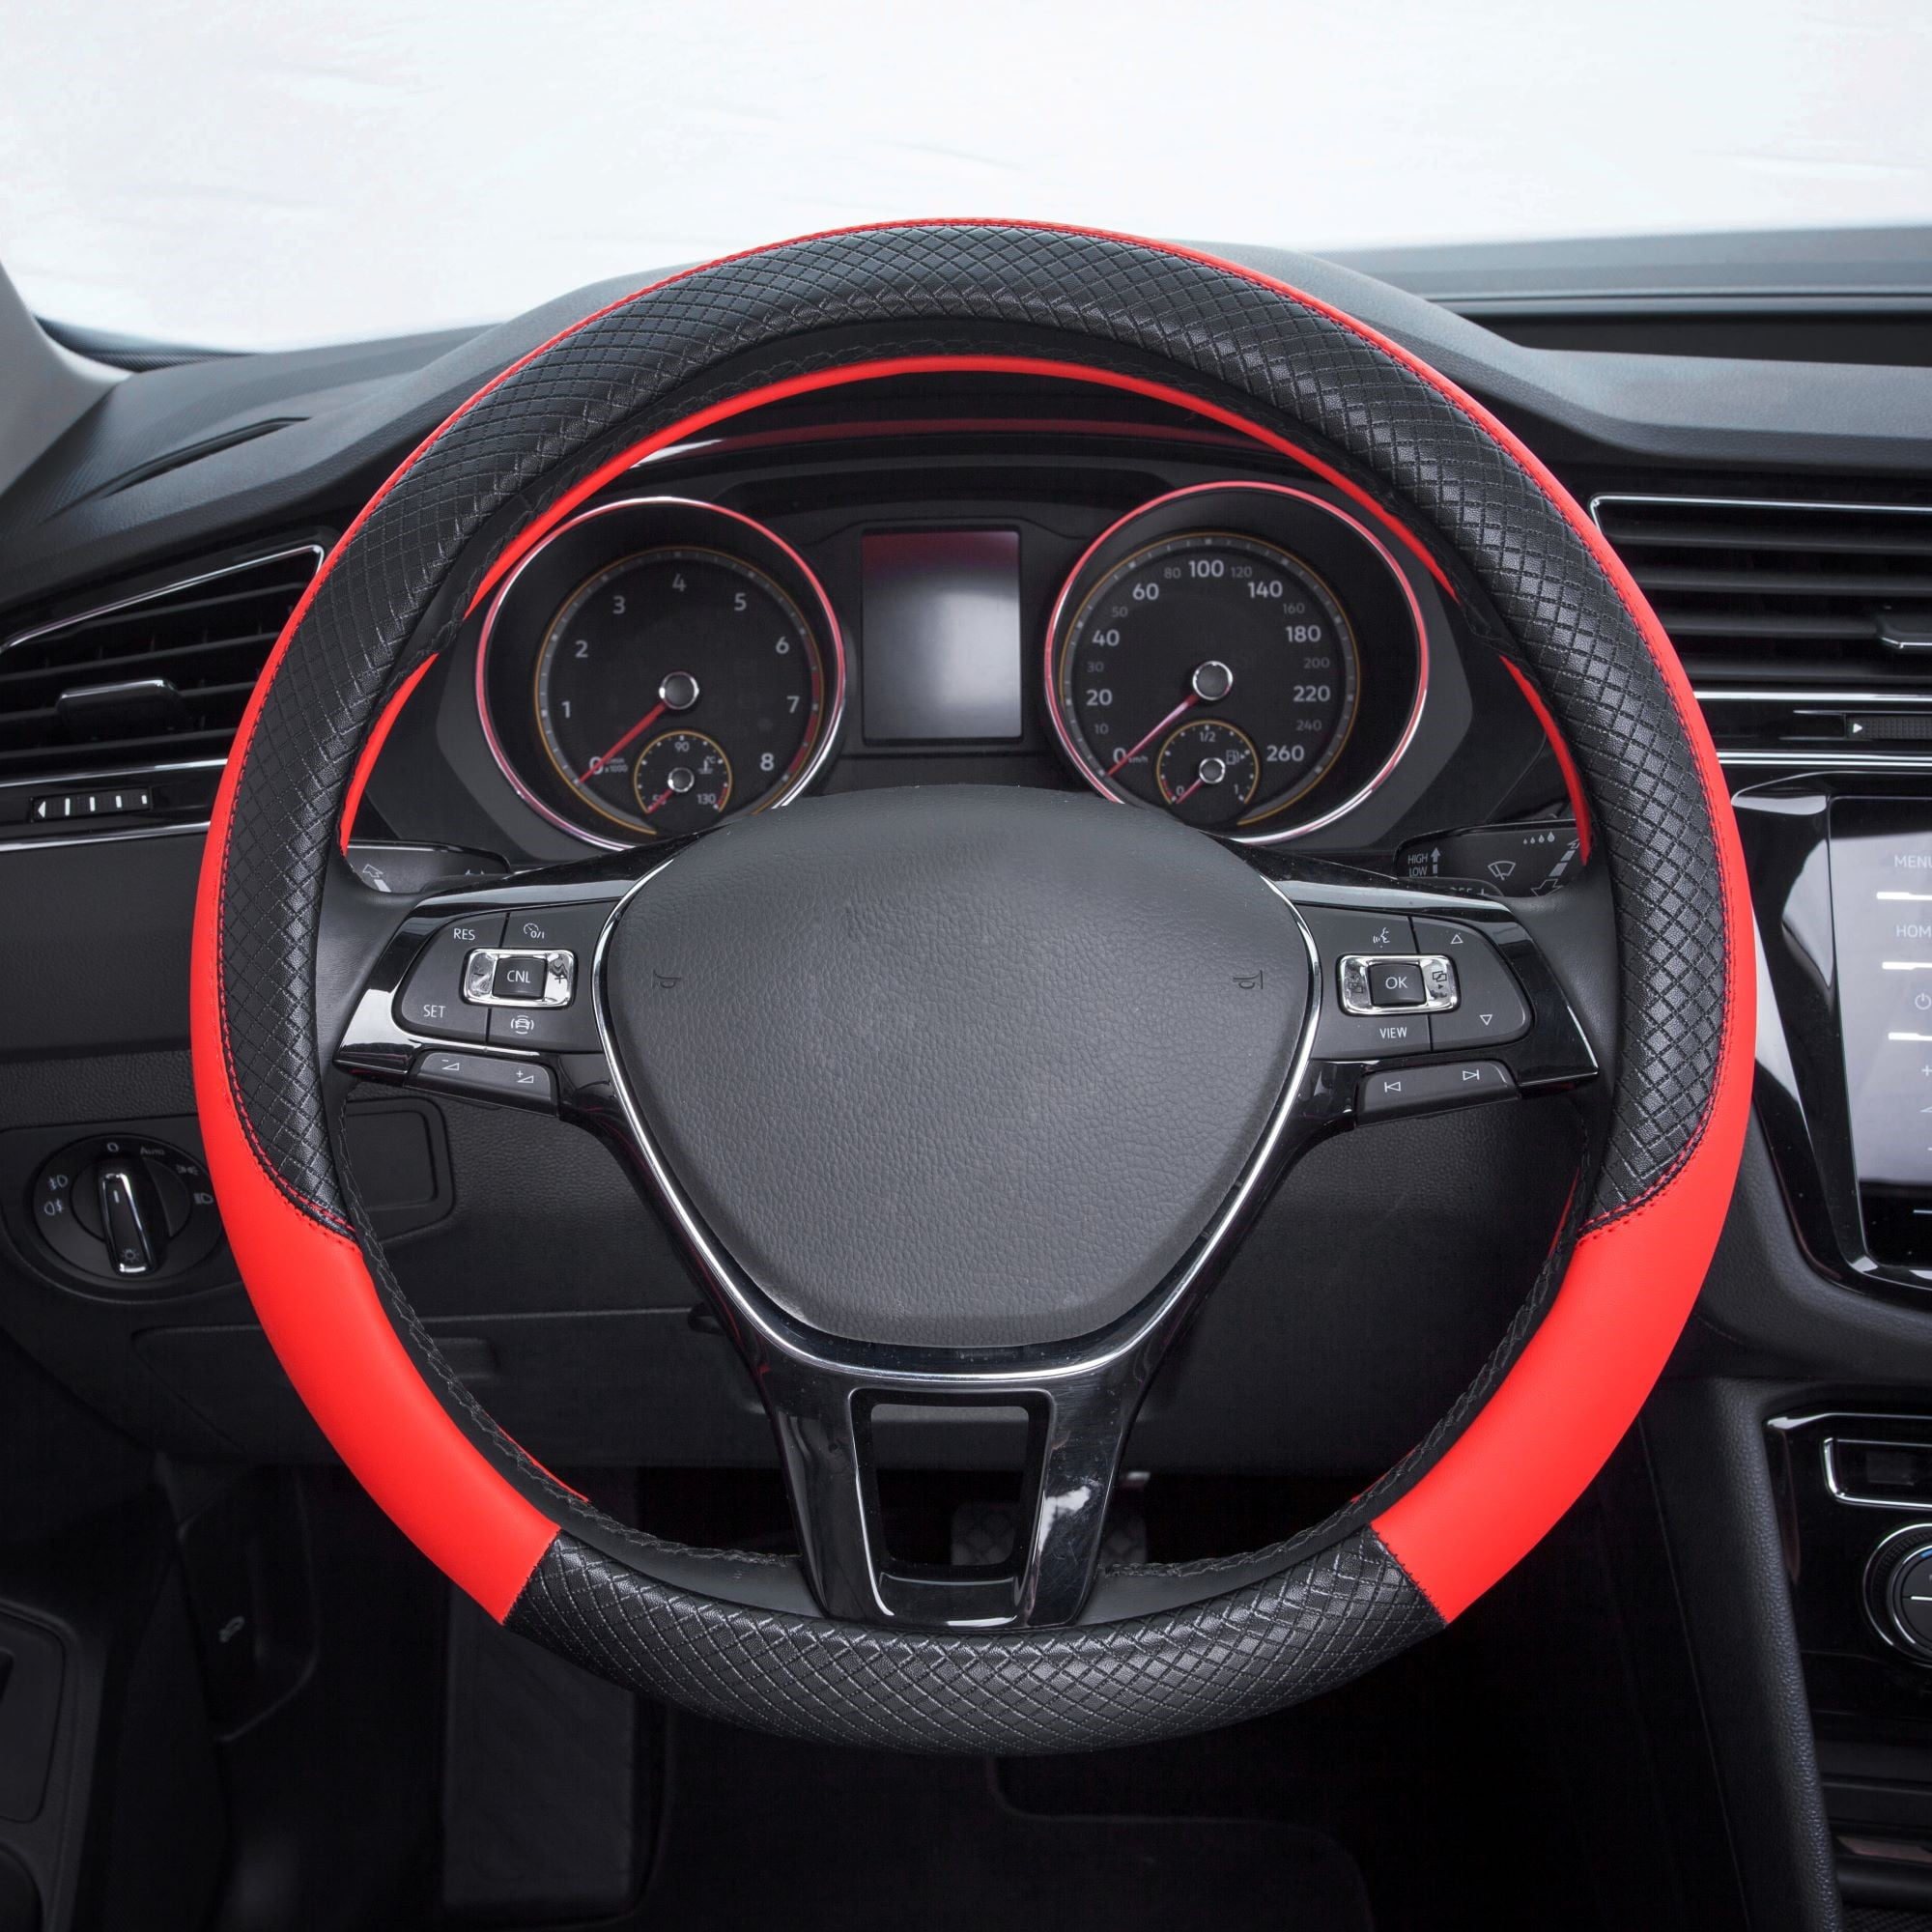 Red Line Durable & Anti-Slip Design 15 inch Universal Black Panther Car Steering Wheel Cover with Wave Pattern